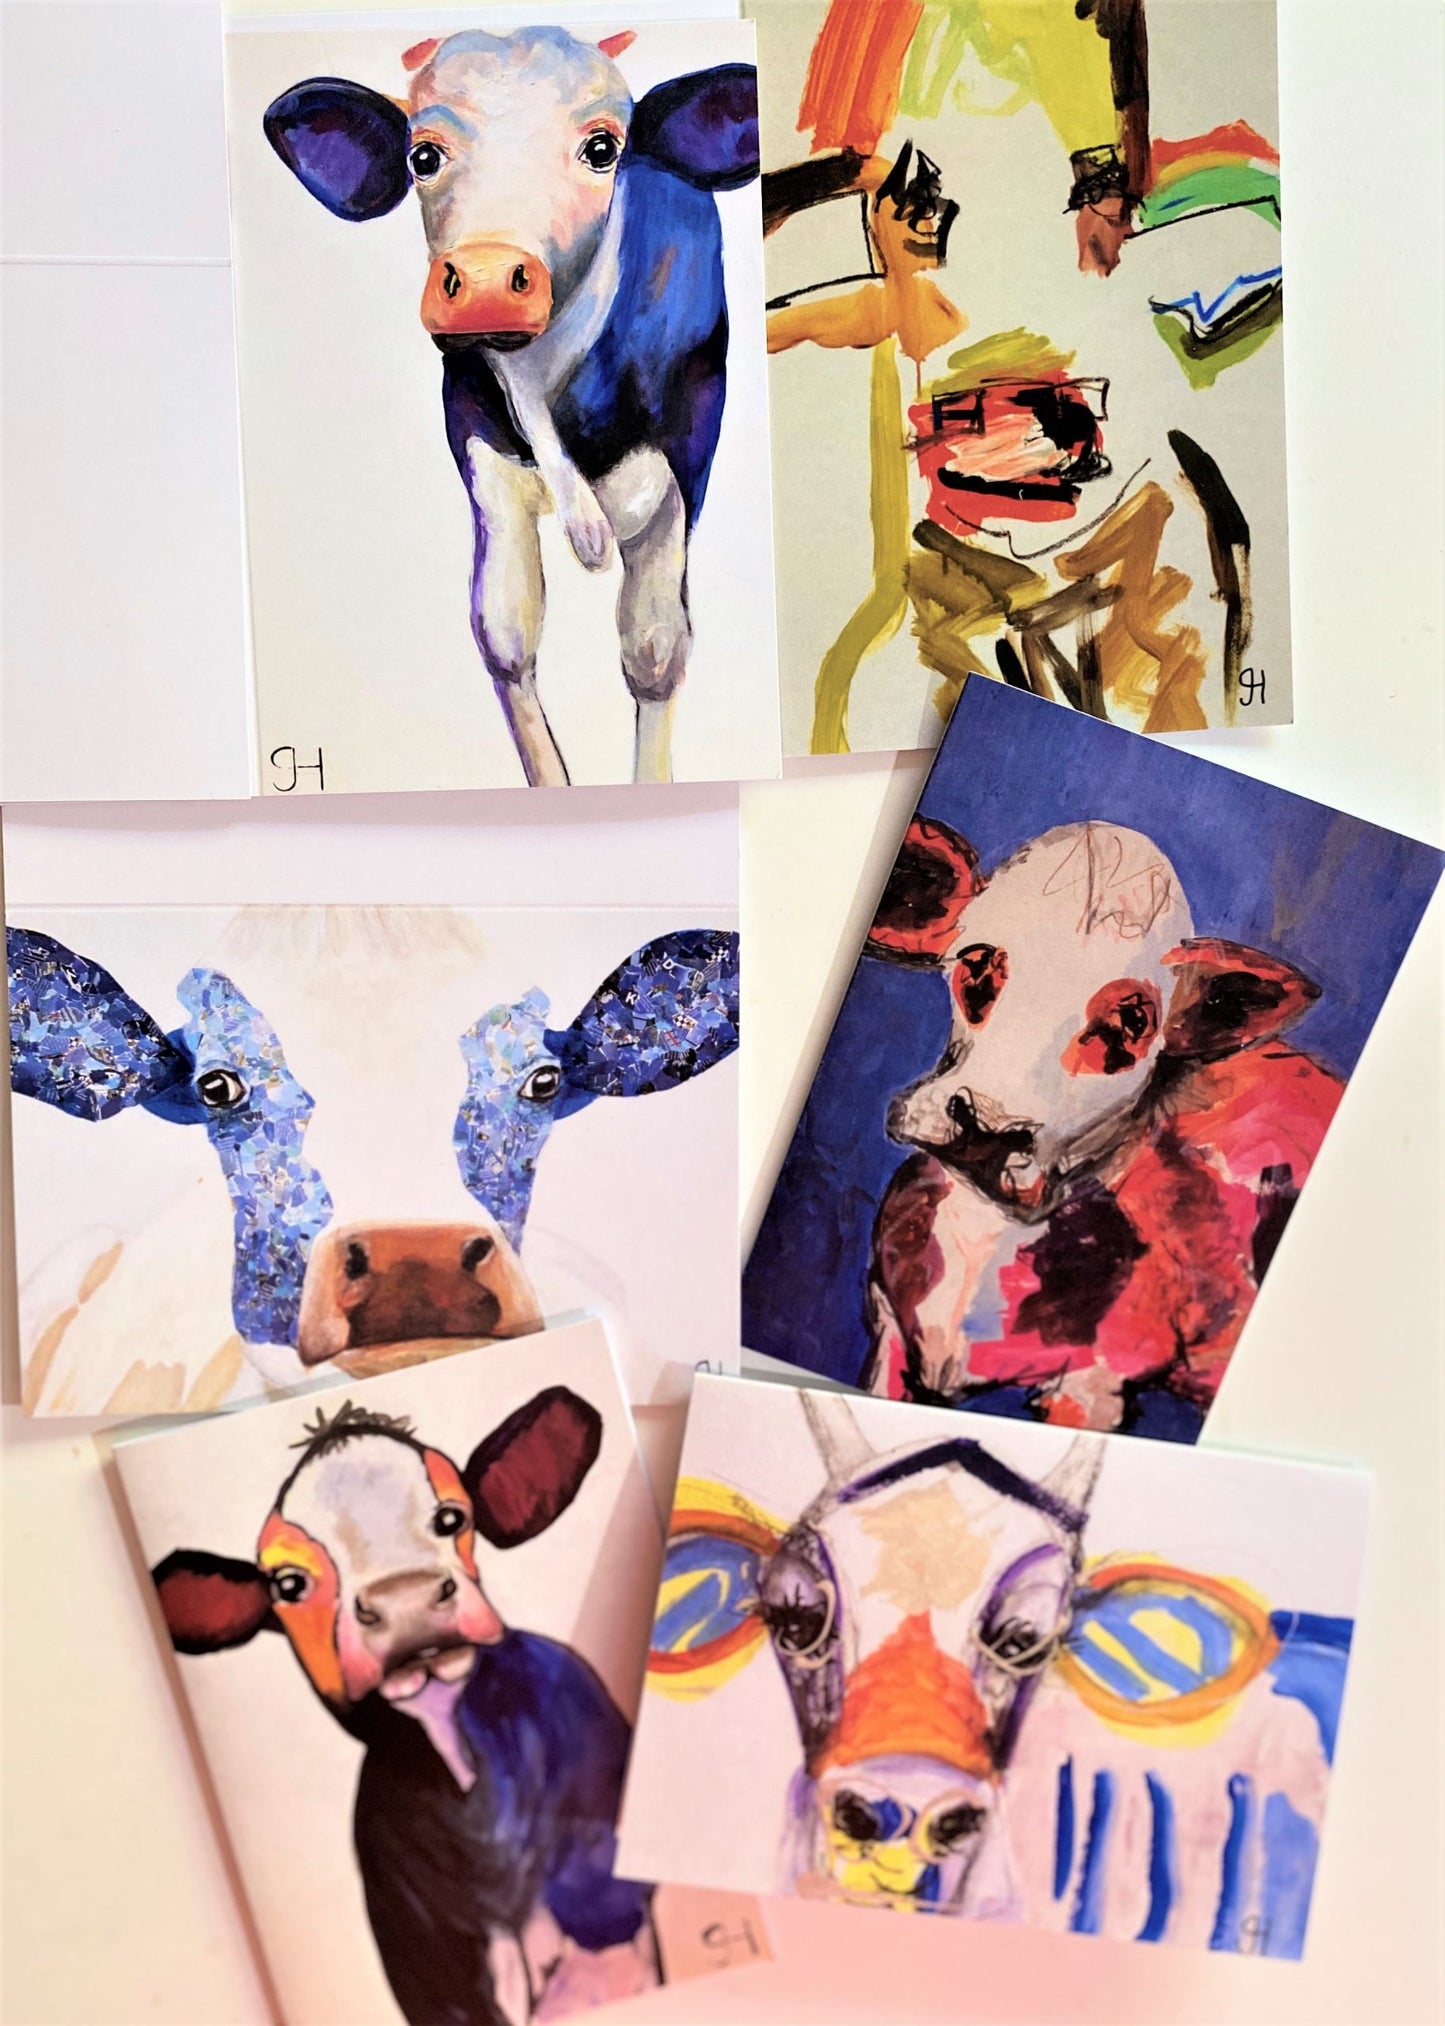 The crazy cow card collection.